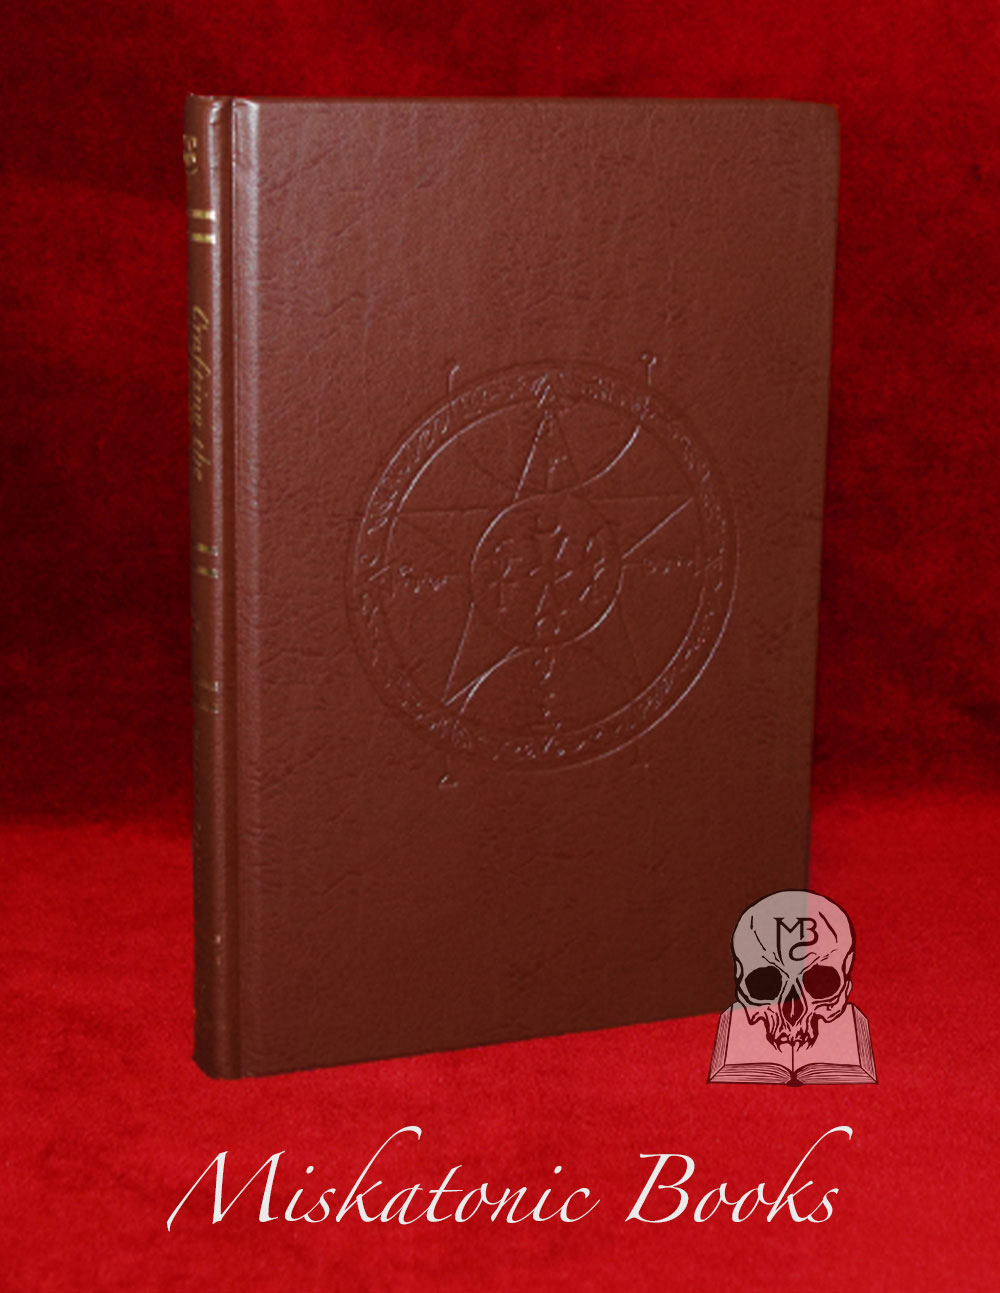 CRAFTING THE ARTE OF TRADITION by Shani Oates - Deluxe Leather Bound Artisan Edition